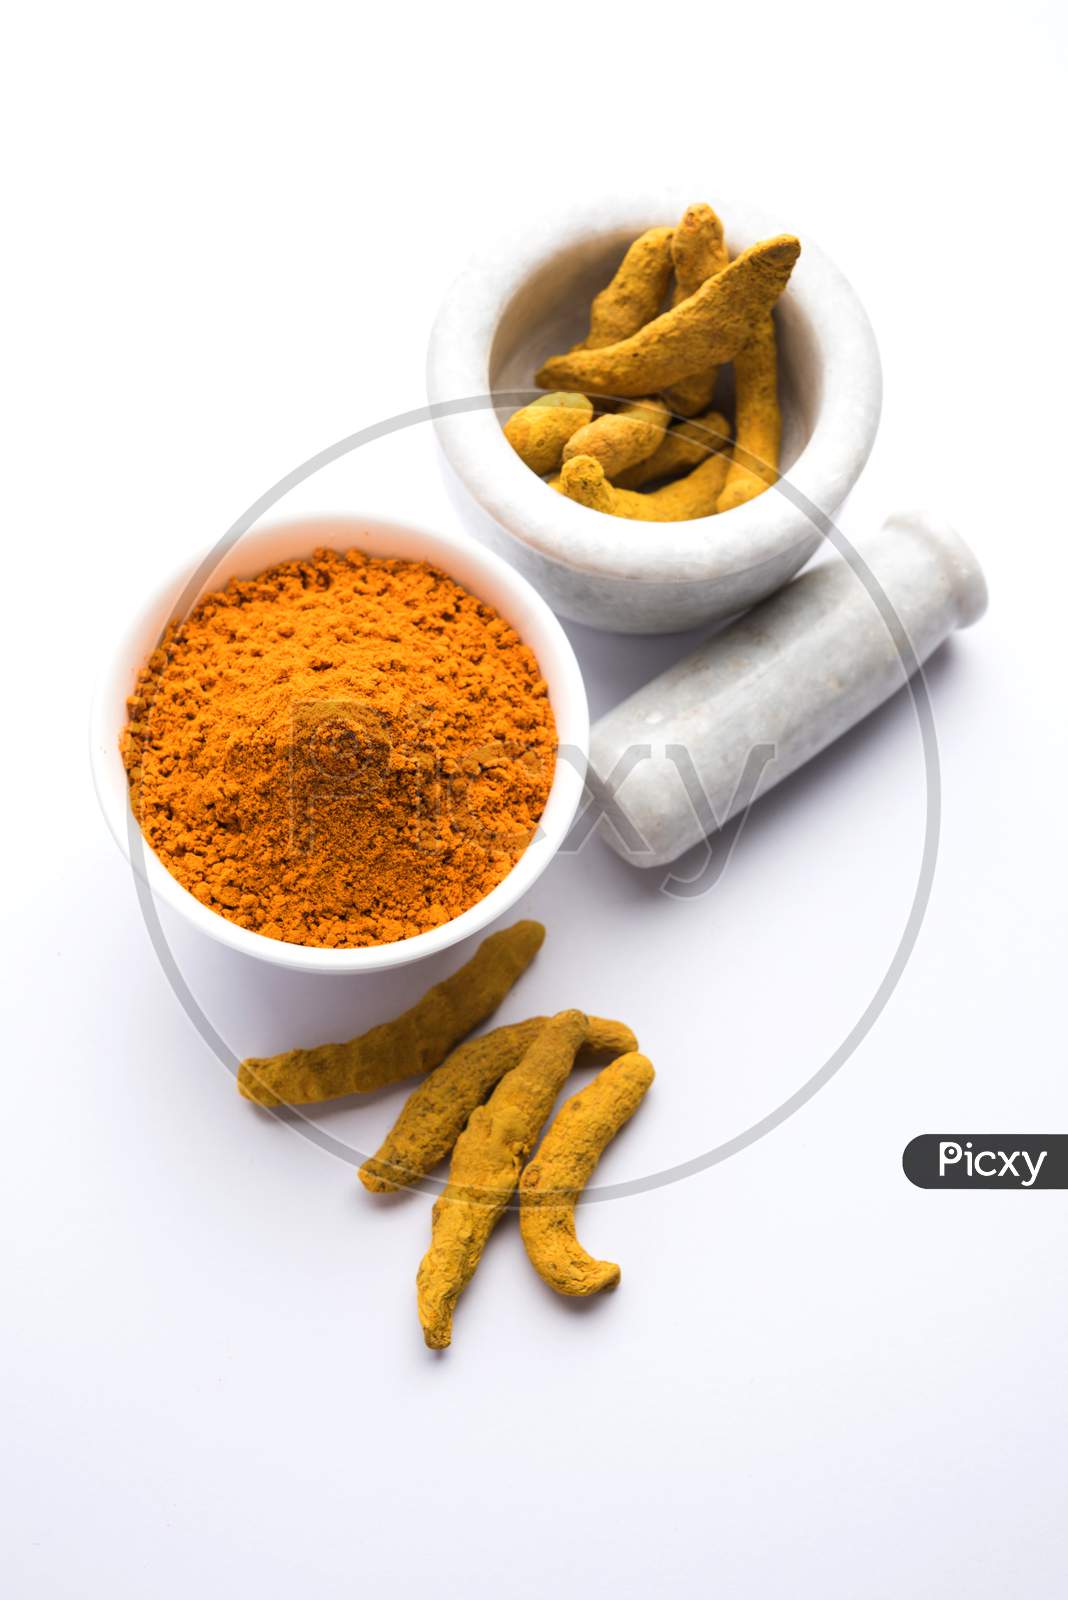 Turmeric or Haldi powder in bowl over colourful background